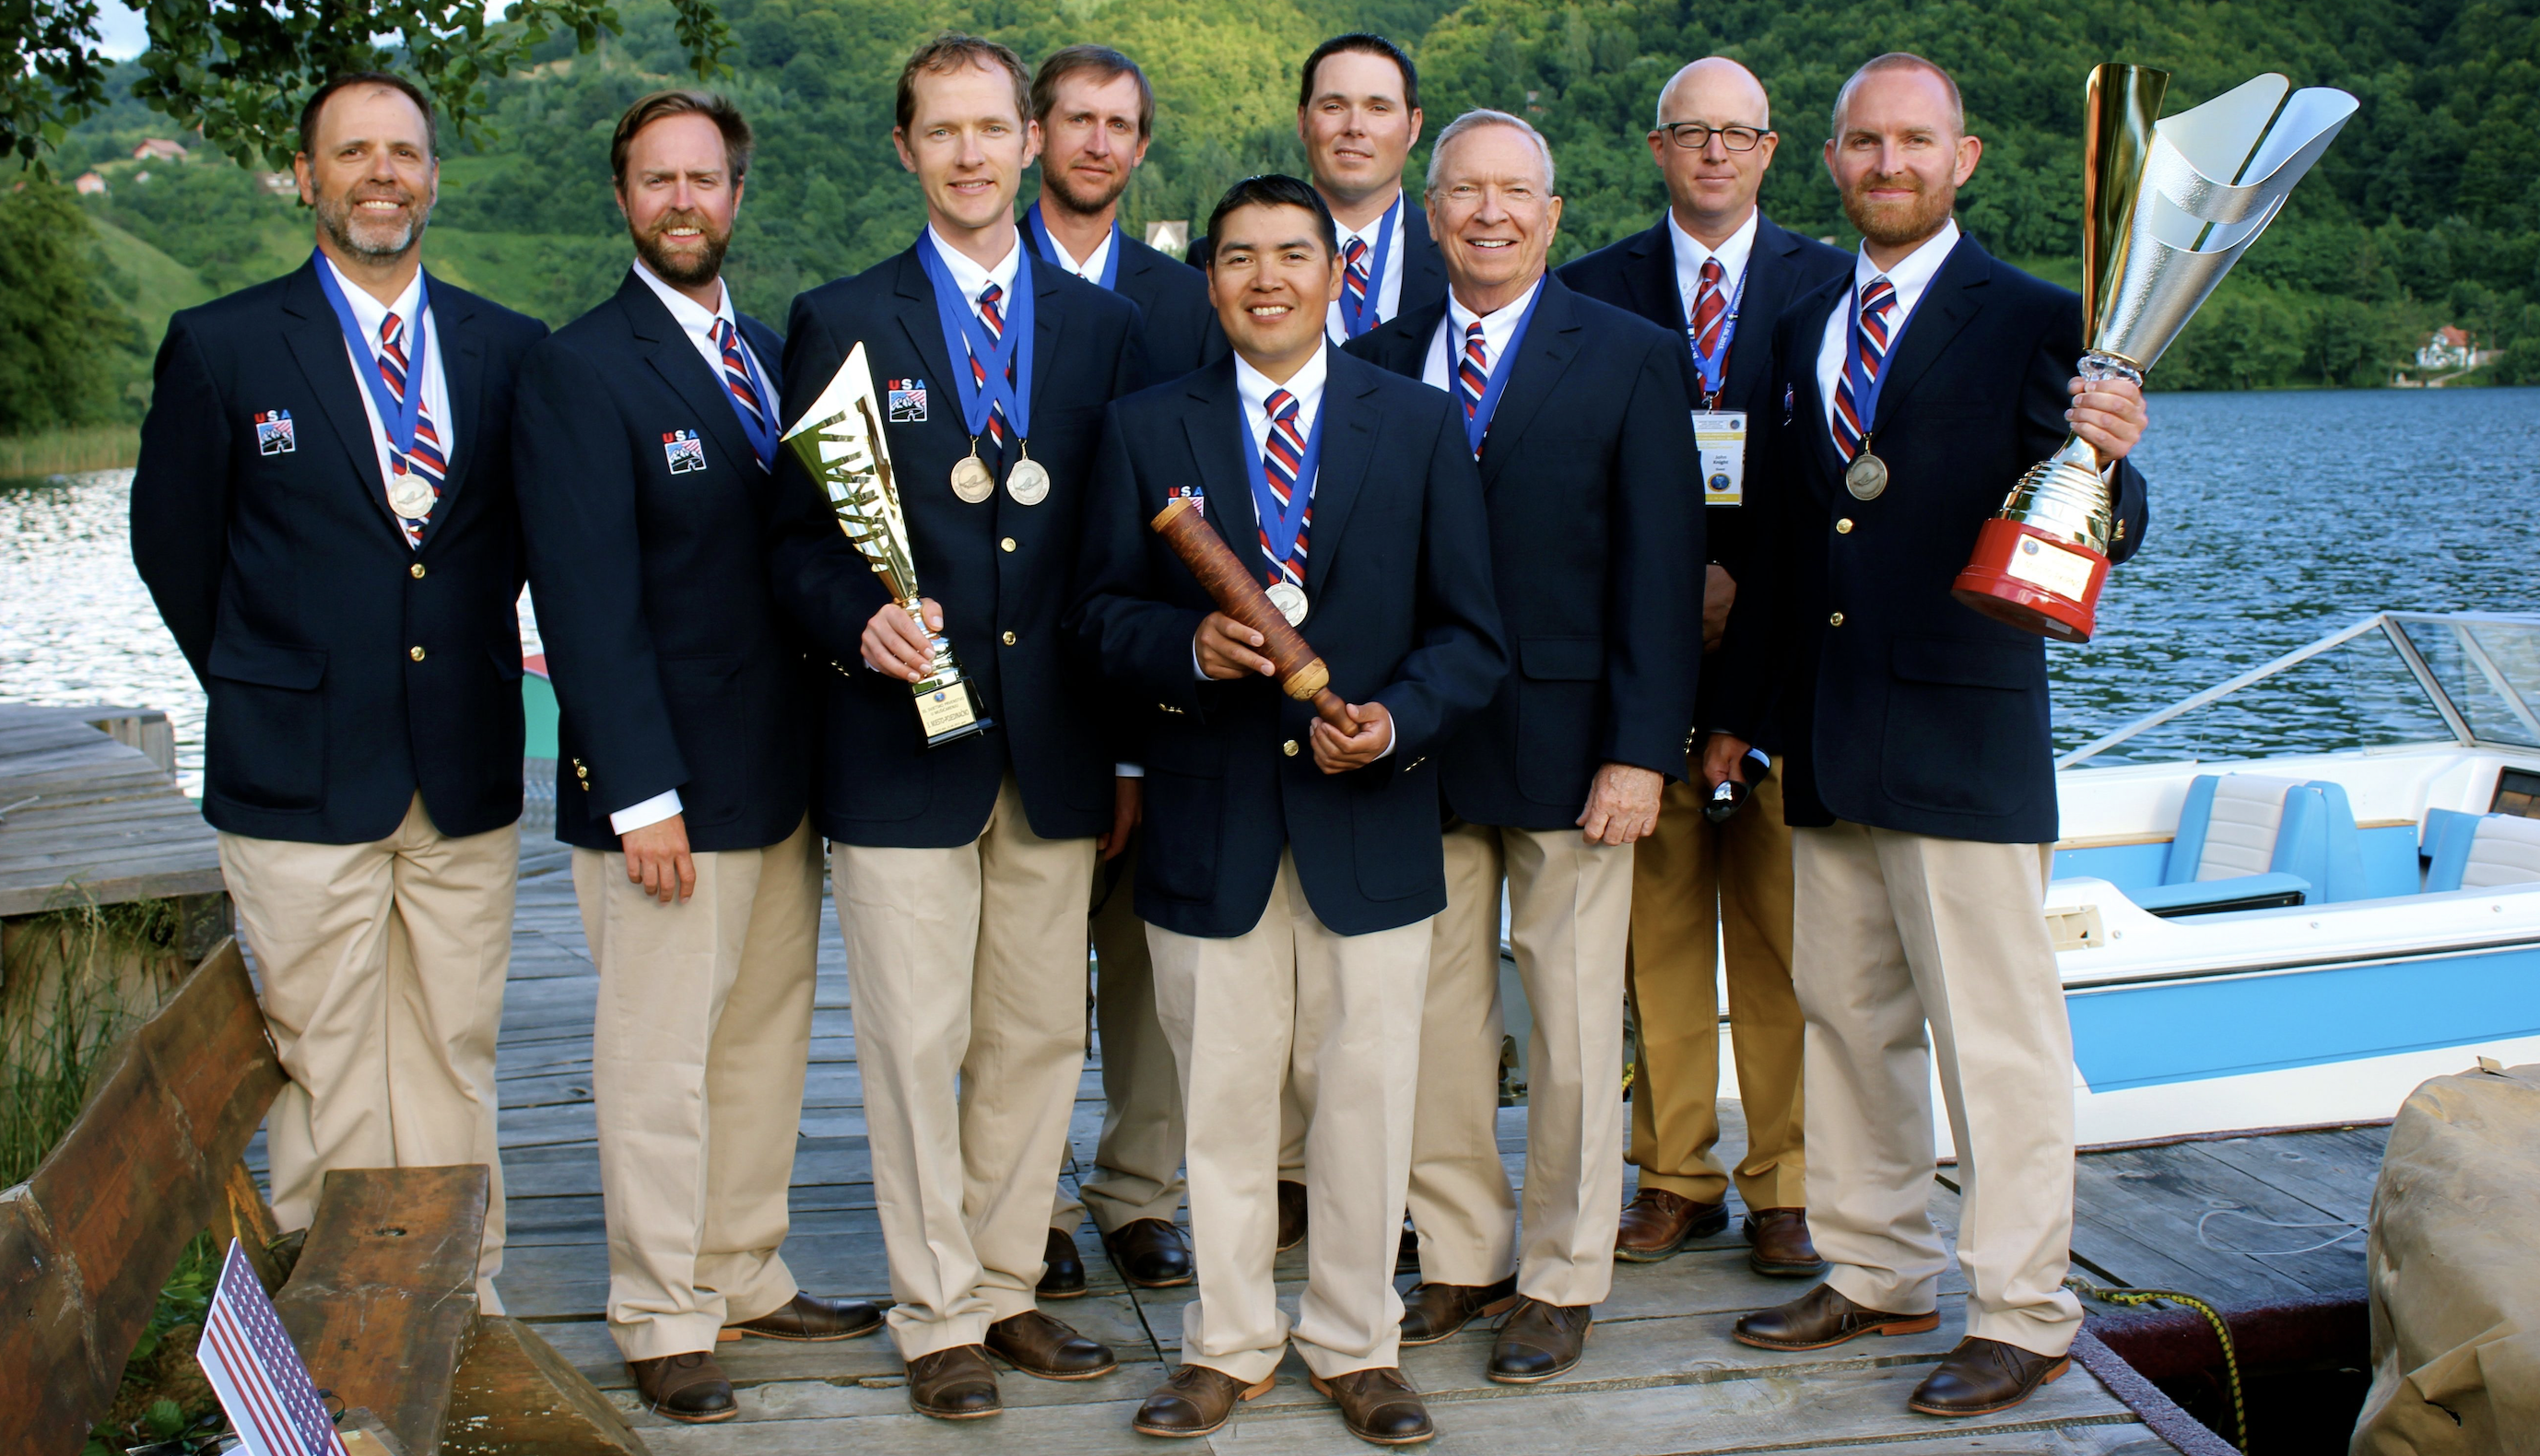 The US fly fishing team on the podium after winning their bronze medal